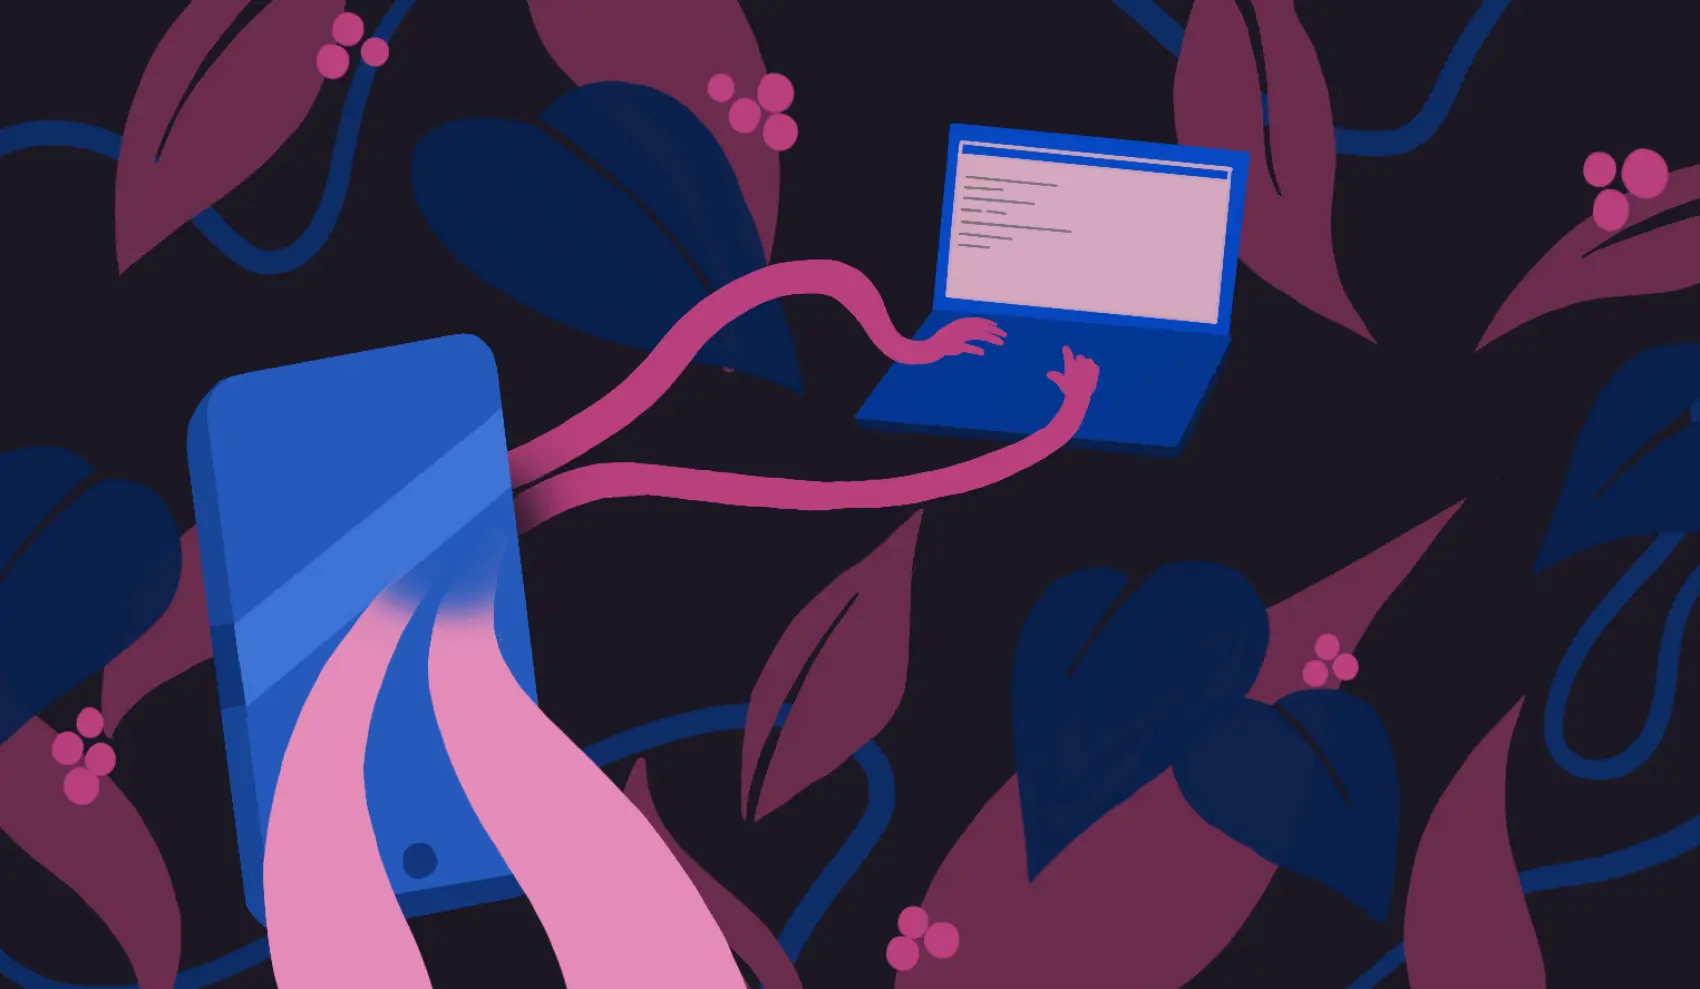 Long rubbery arms snaking their way into a phone screen and through the ether for the fingers to reach a laptop keyboard hovering in the void, surrounded by leaves and berries in a moody palette.